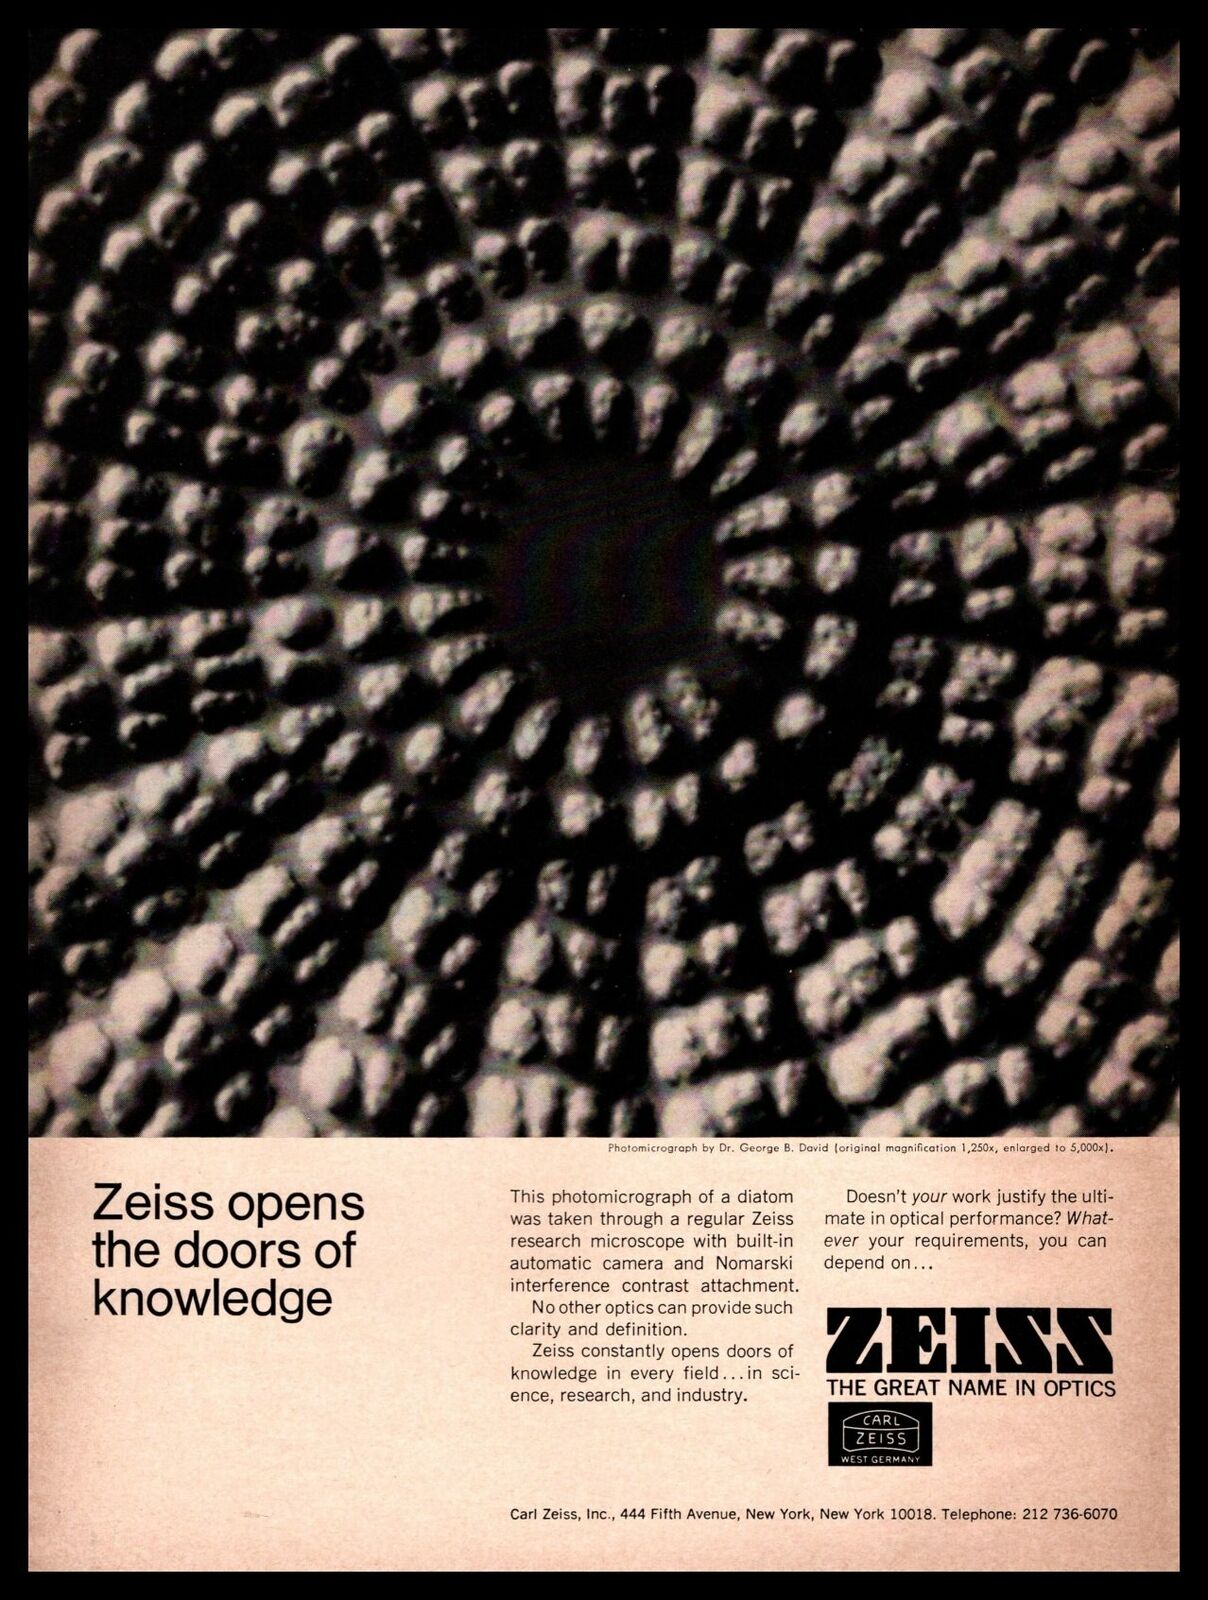 1968 Carl Zeiss Optic Lenses West Germany Photomicrograph Of A Diatom Print Ad